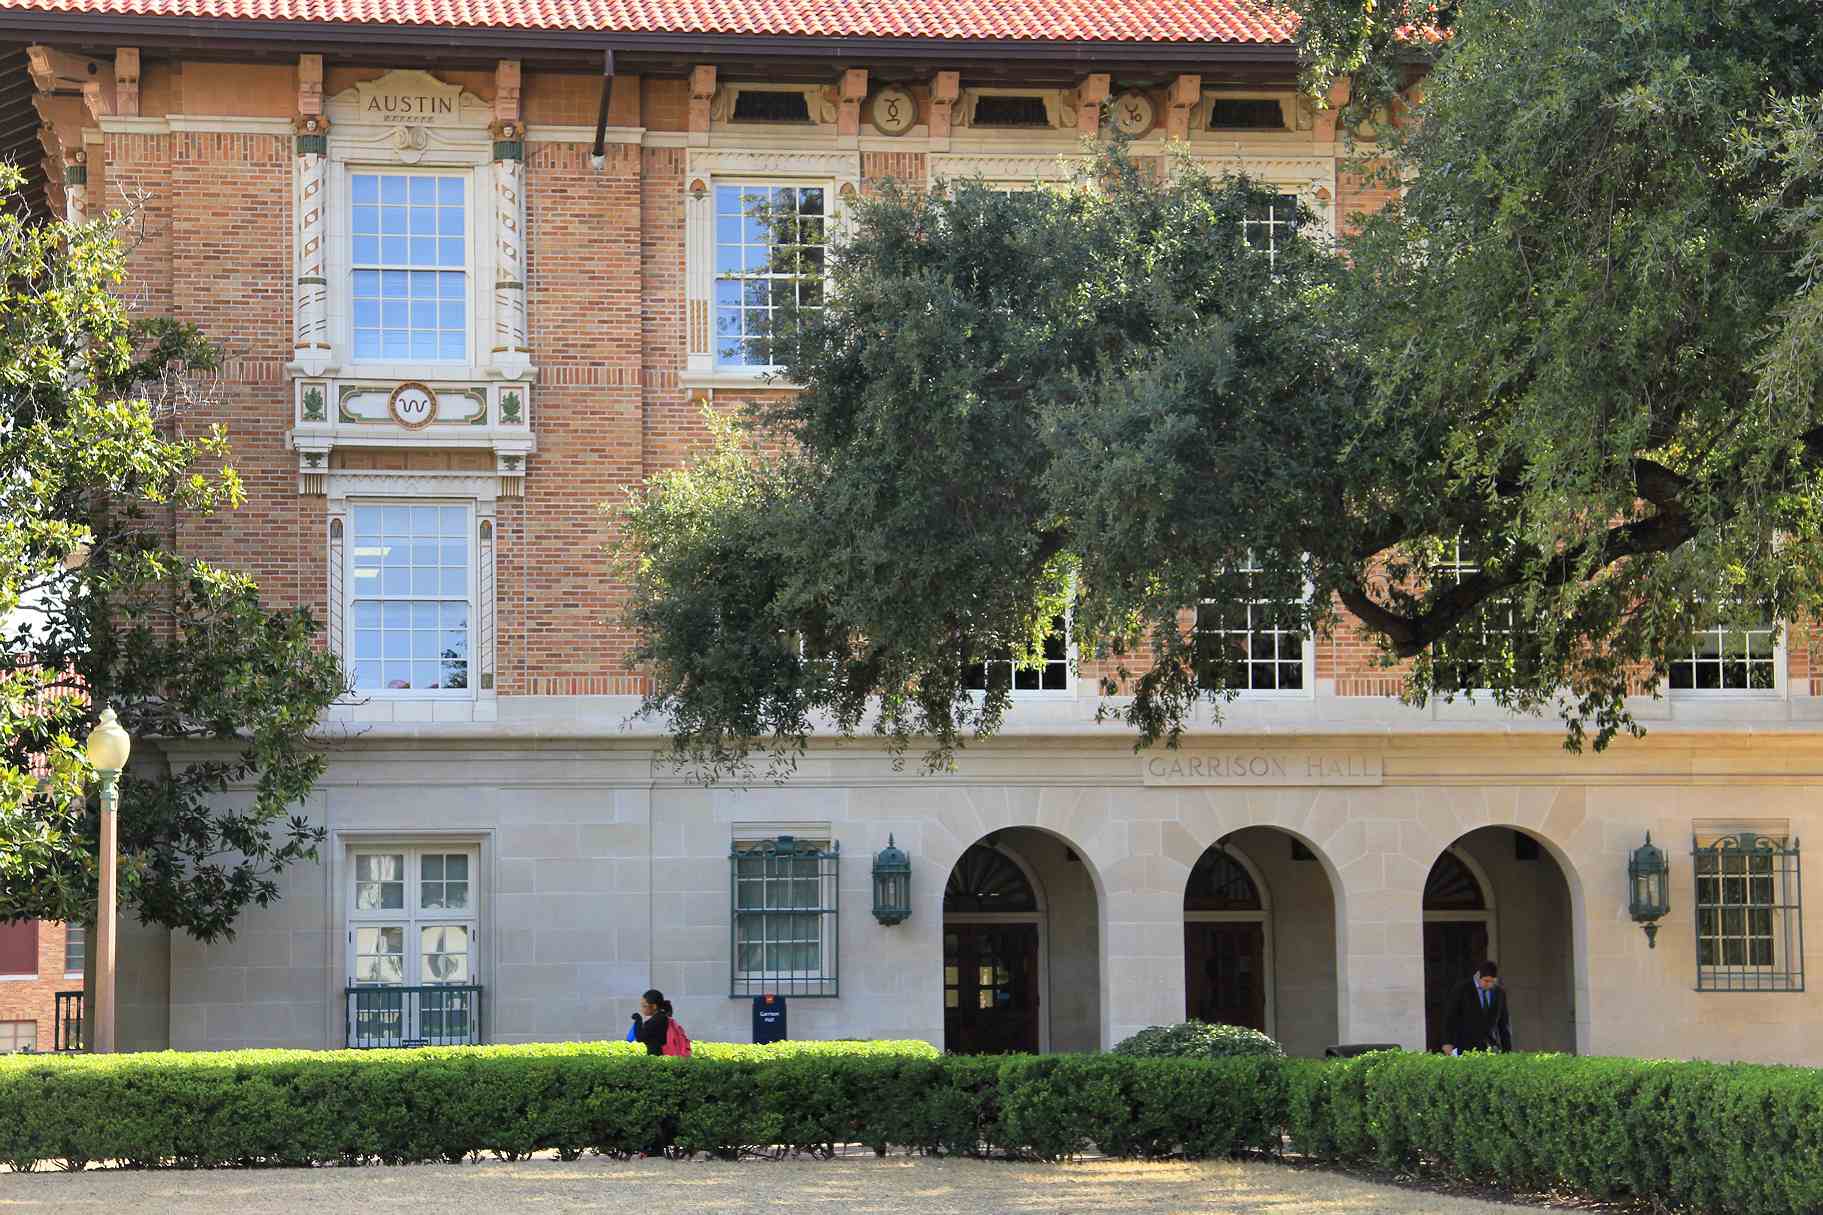 Photograph of the front facade of Garrison Hall on the campus of the University of Texas at Austin